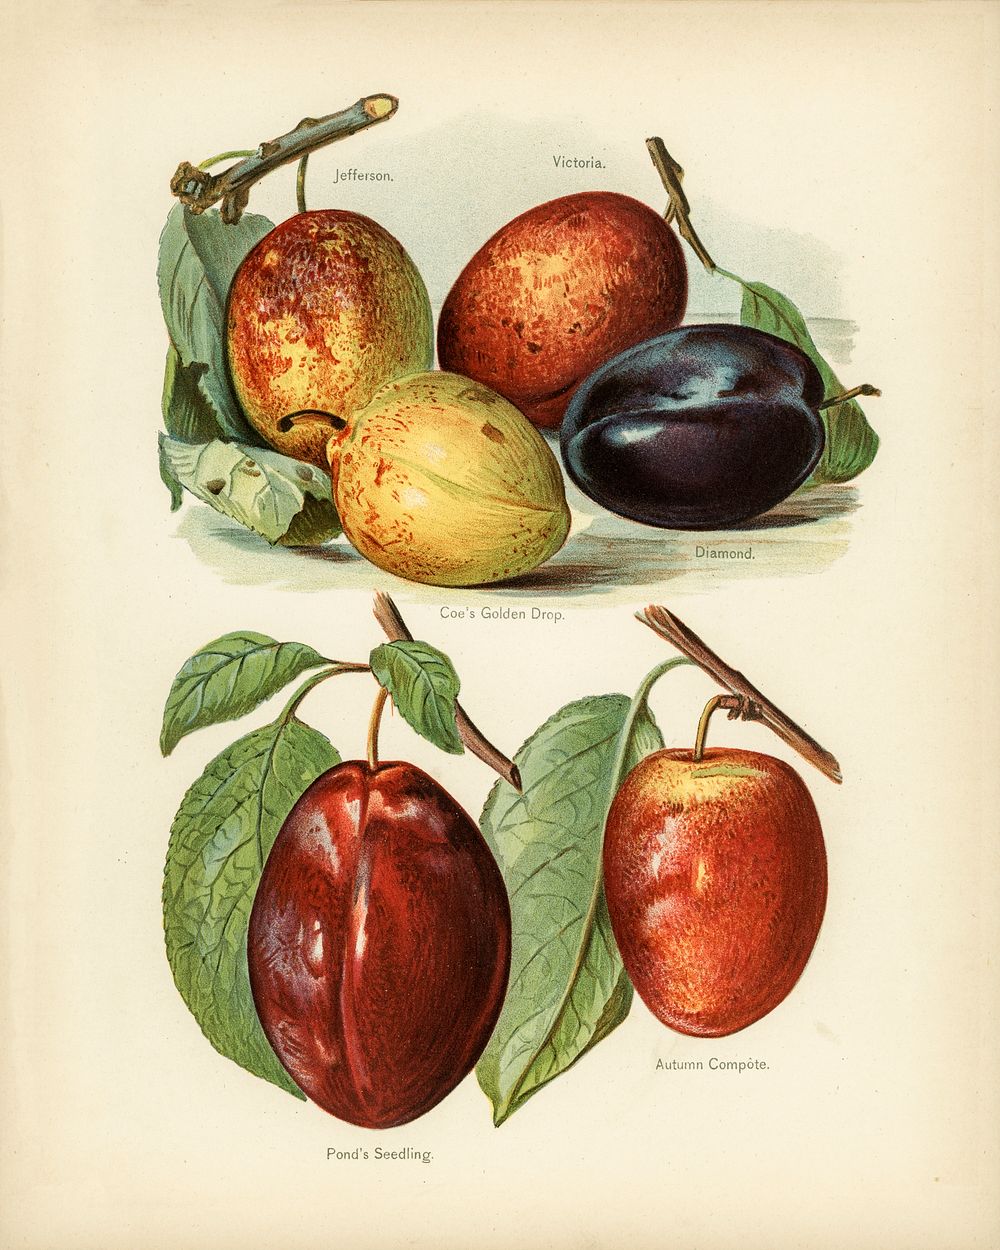 Vintage illustration of plum digitally enhanced from our own vintage edition of The Fruit Grower's Guide (1891) by John…